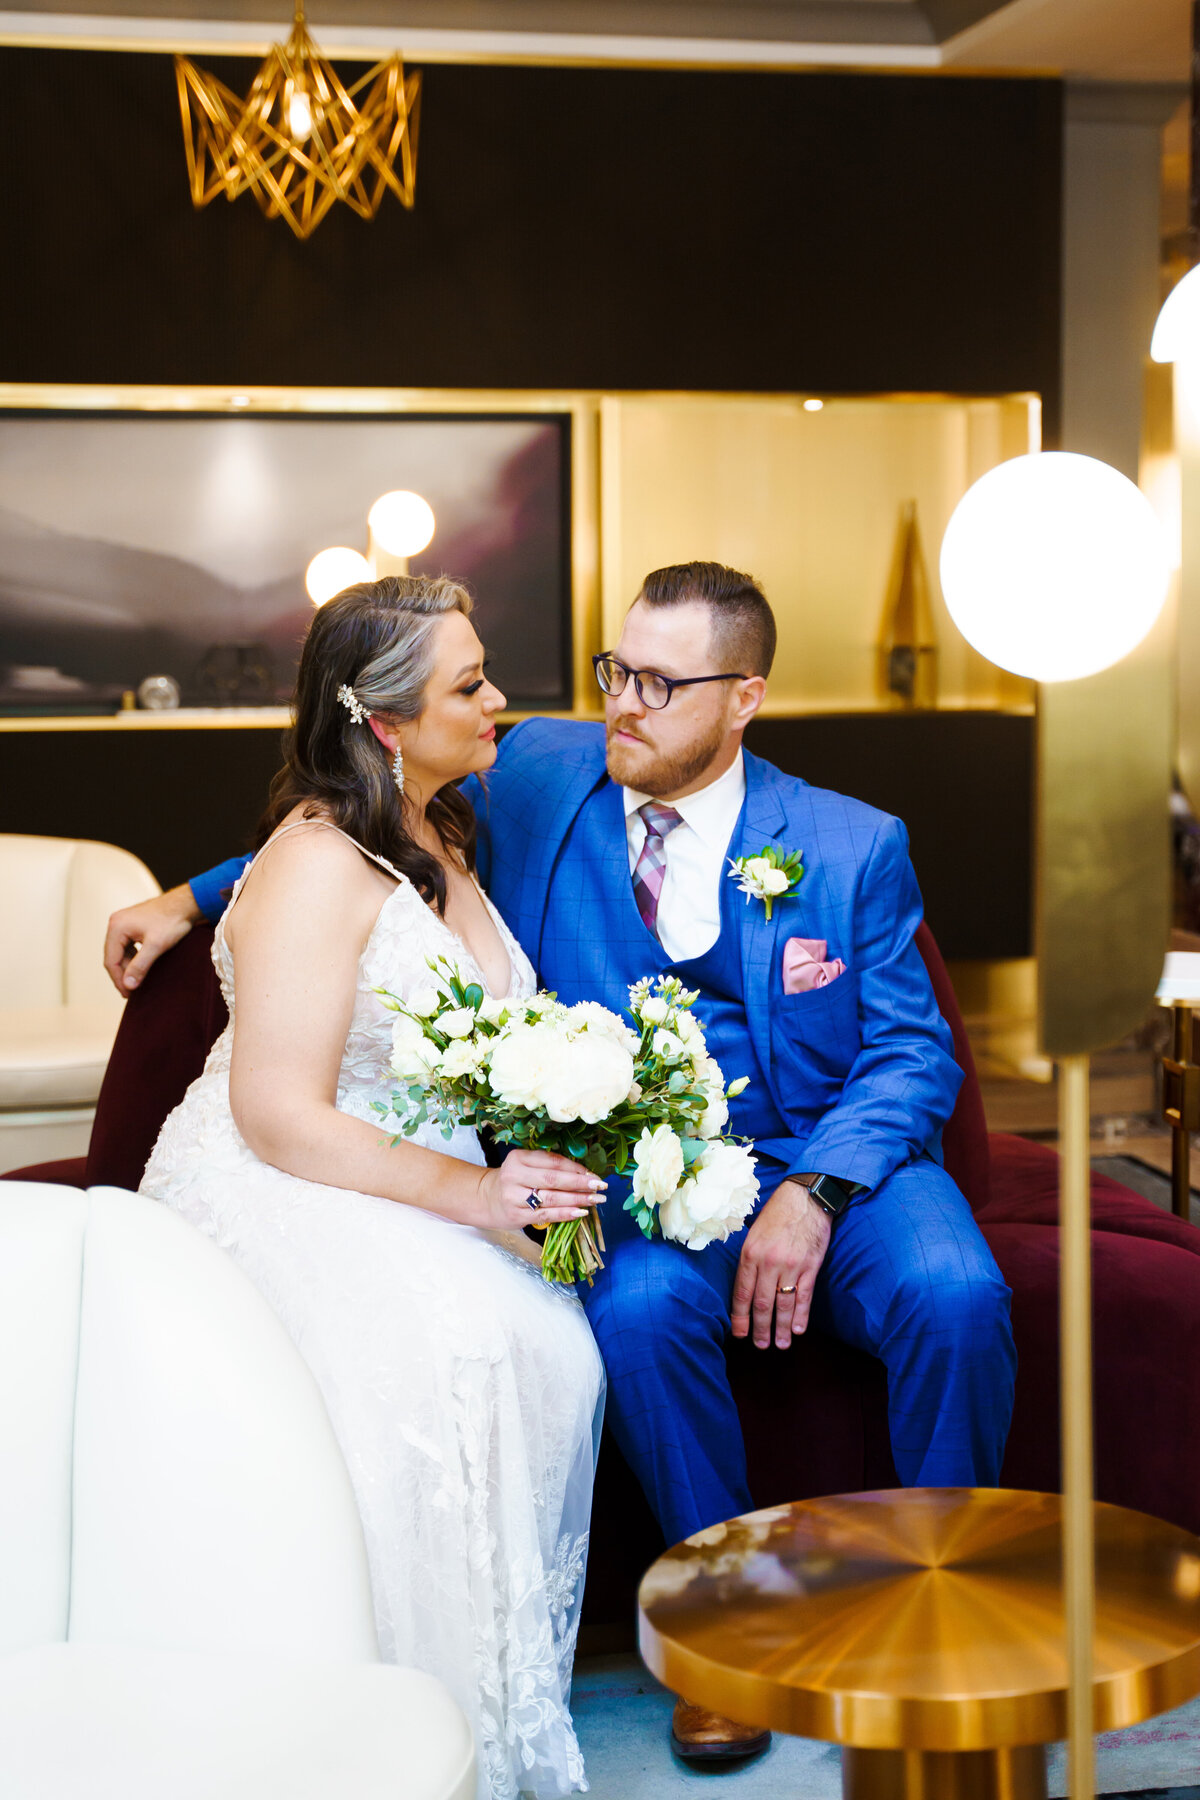 Bride and groom sit on a loveseat and look at each other at a modern hotel - Hotel Leveque in Columbus, Ohio.